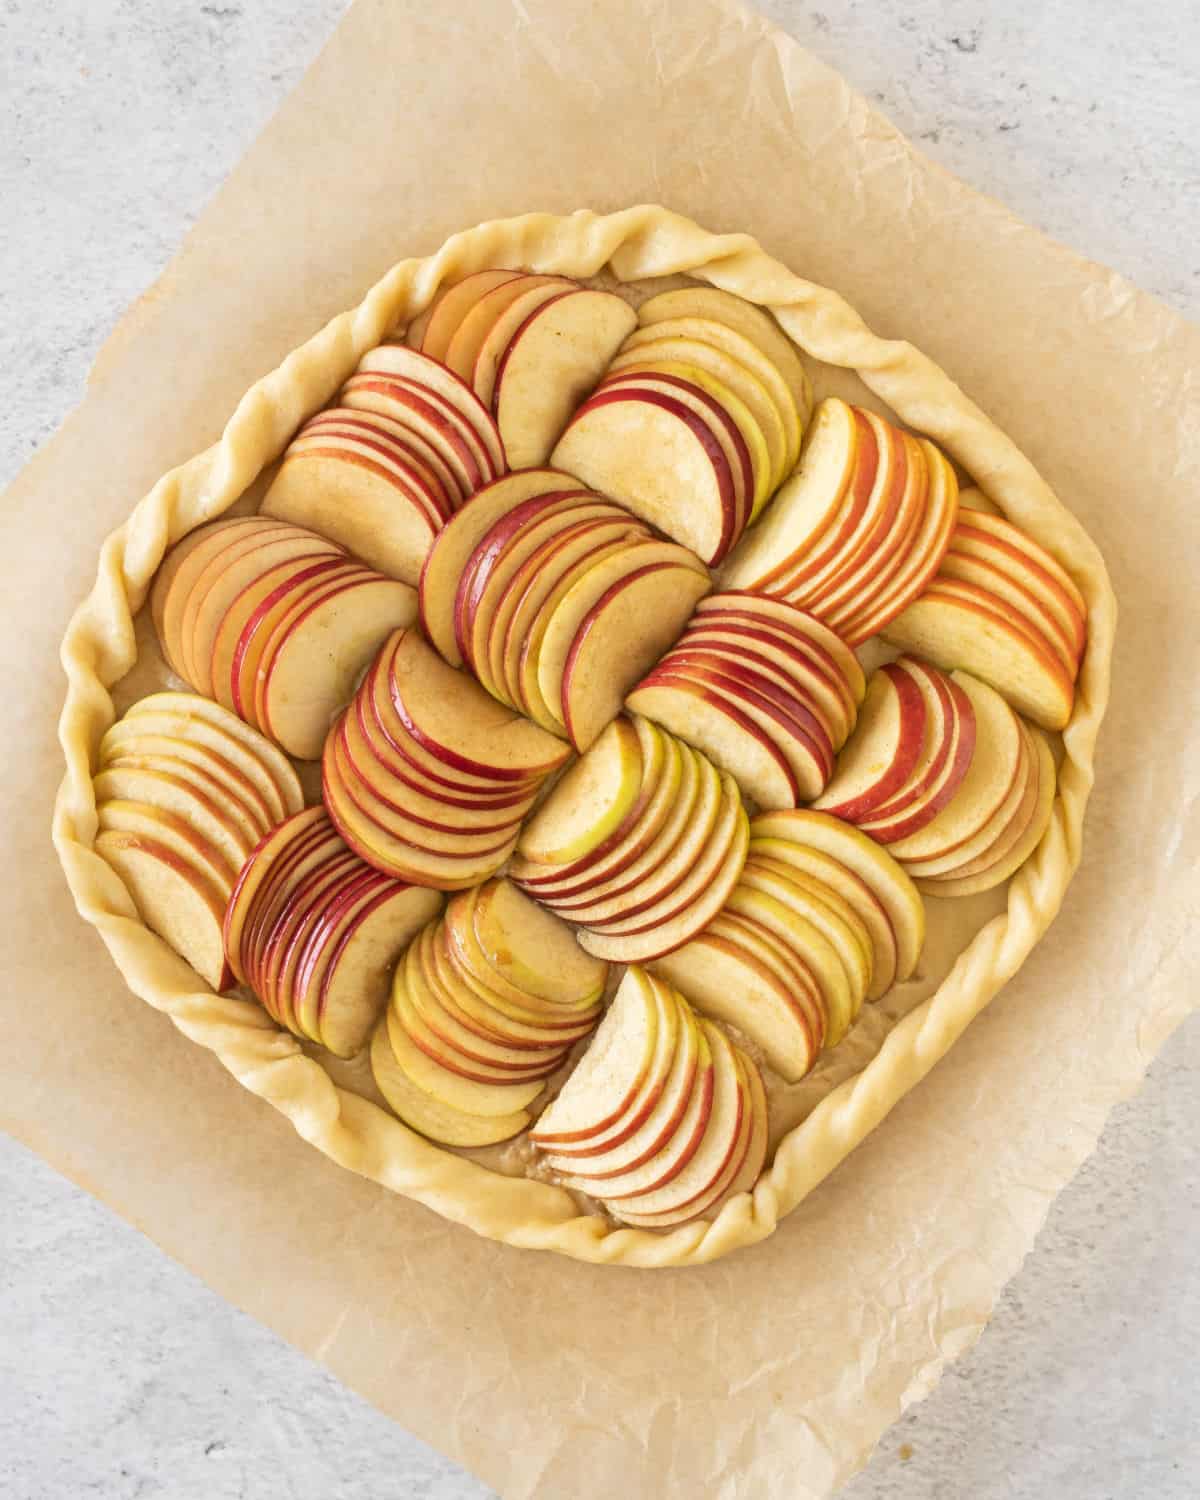 Sliced apples arranged over pie crust to make an apple galette. Beige parchment paper, grey surface.